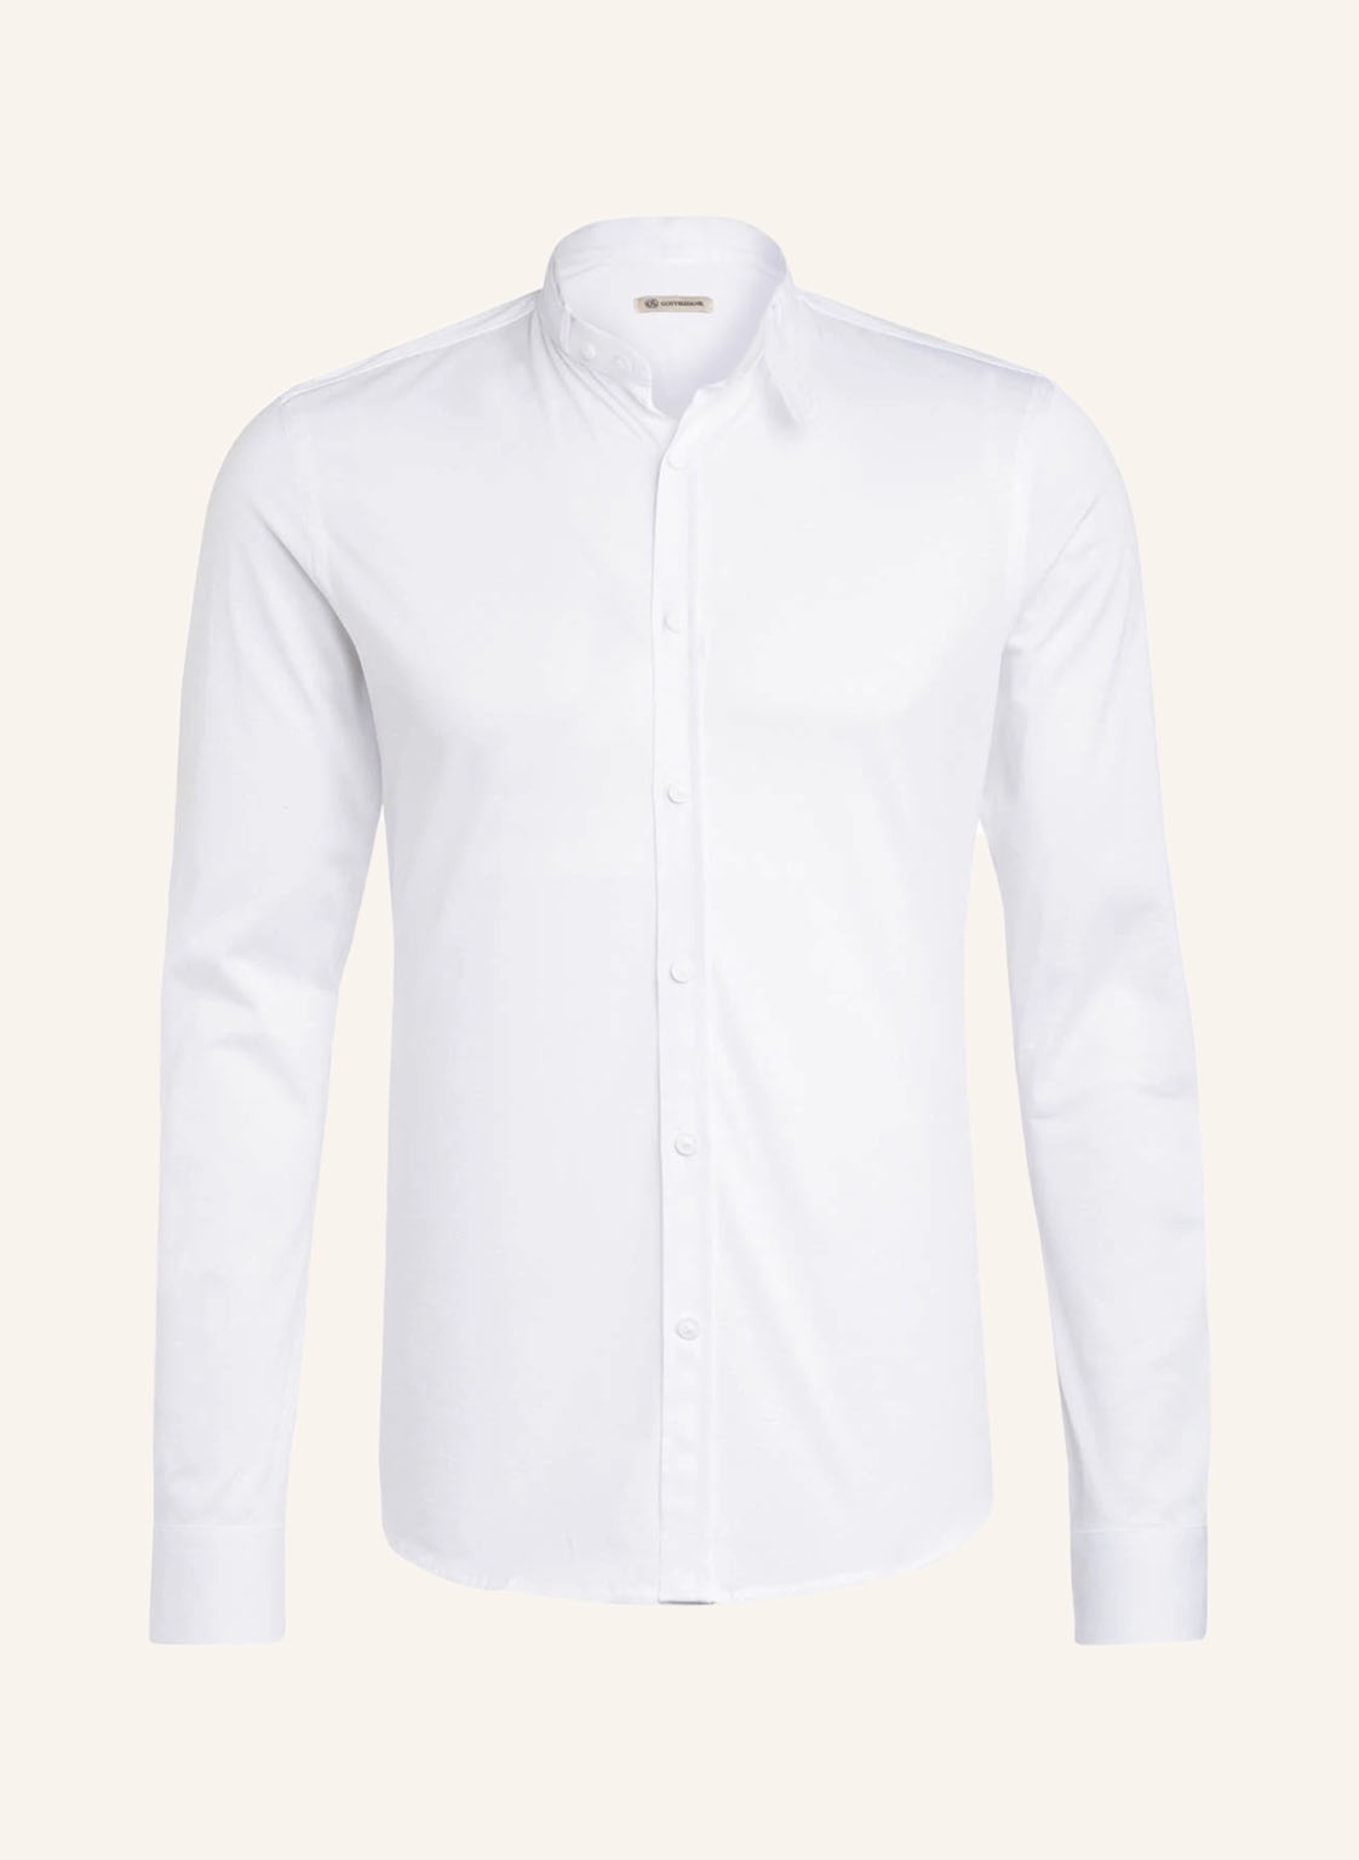 Gottseidank Trachten shirt LENZ extra slim fit with stand-up collar, Color: WHITE (Image 1)